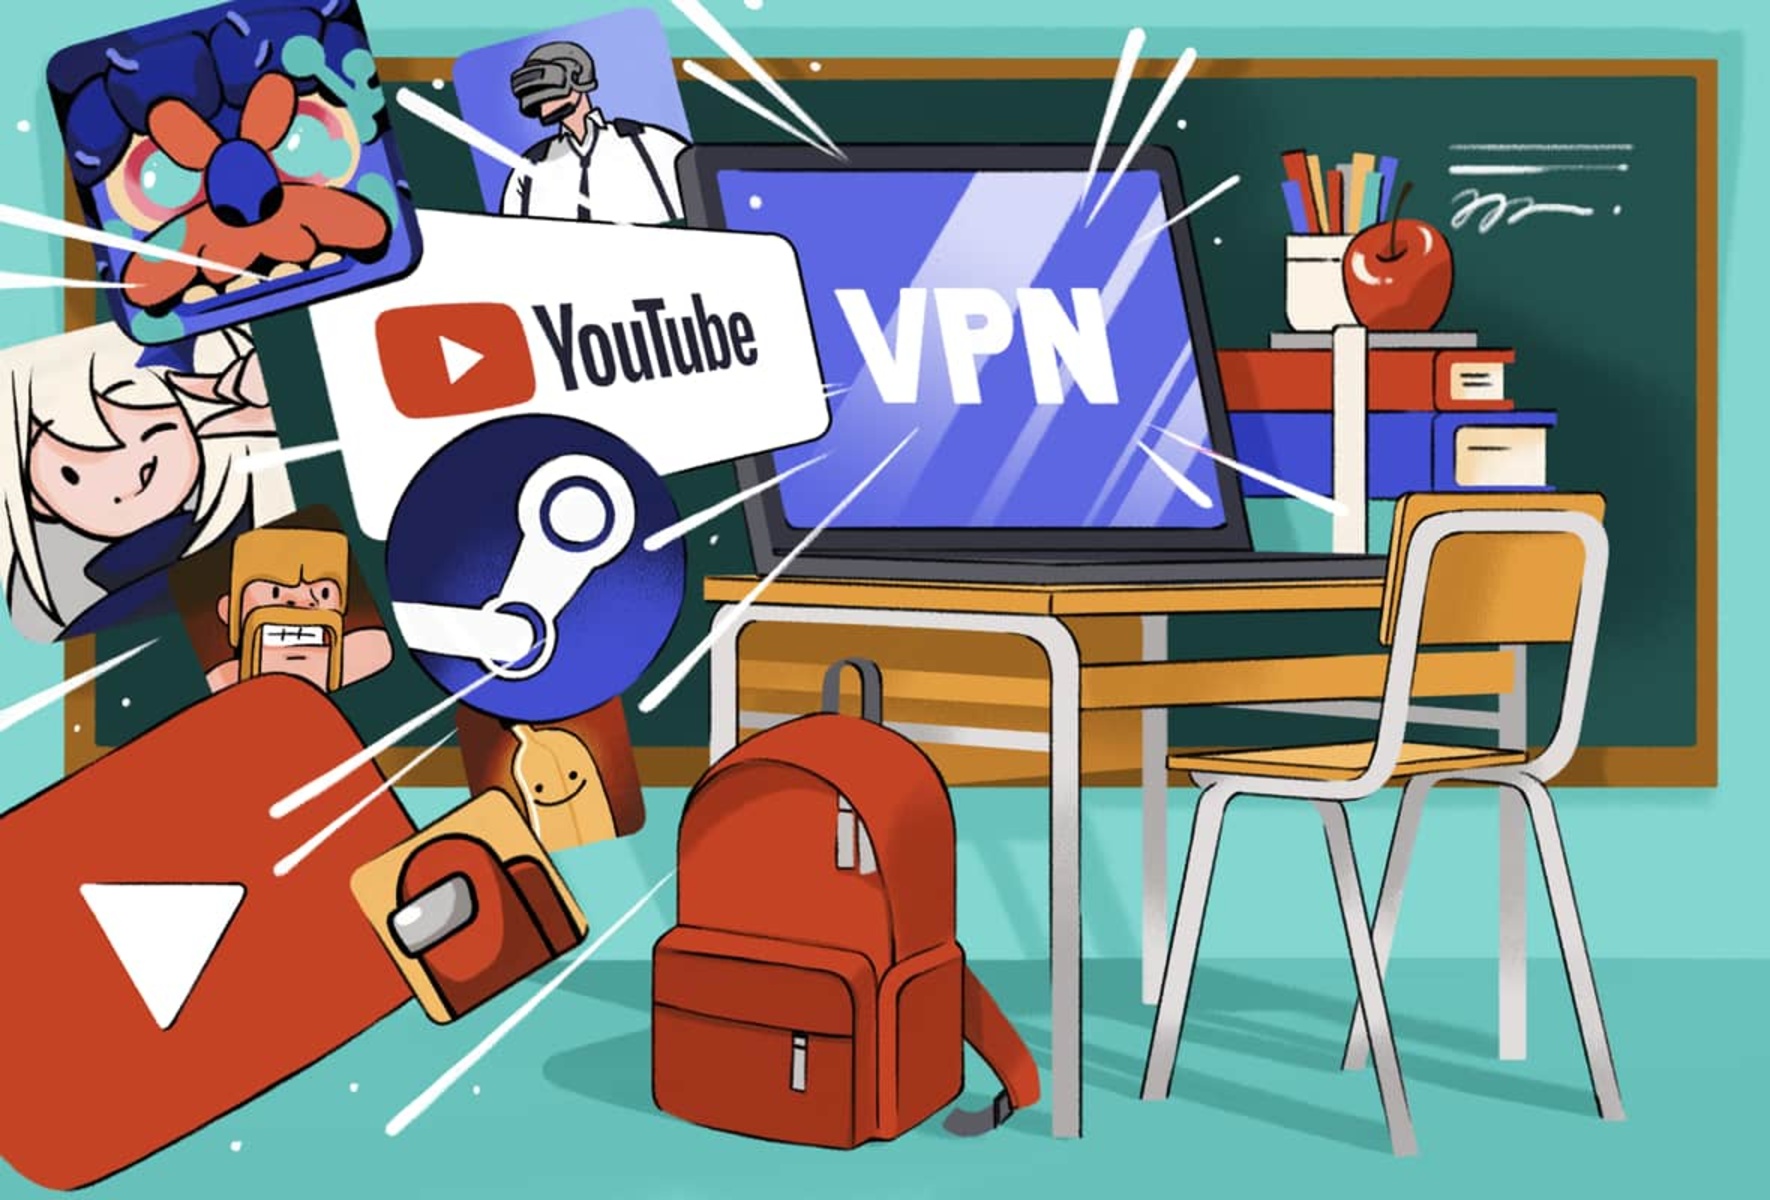 A student is sitting at a desk in a classroom. The student is using a laptop to access a variety of websites, including YouTube, Steam, and Clash of Clans. The student is also using a VPN to access blocked websites.